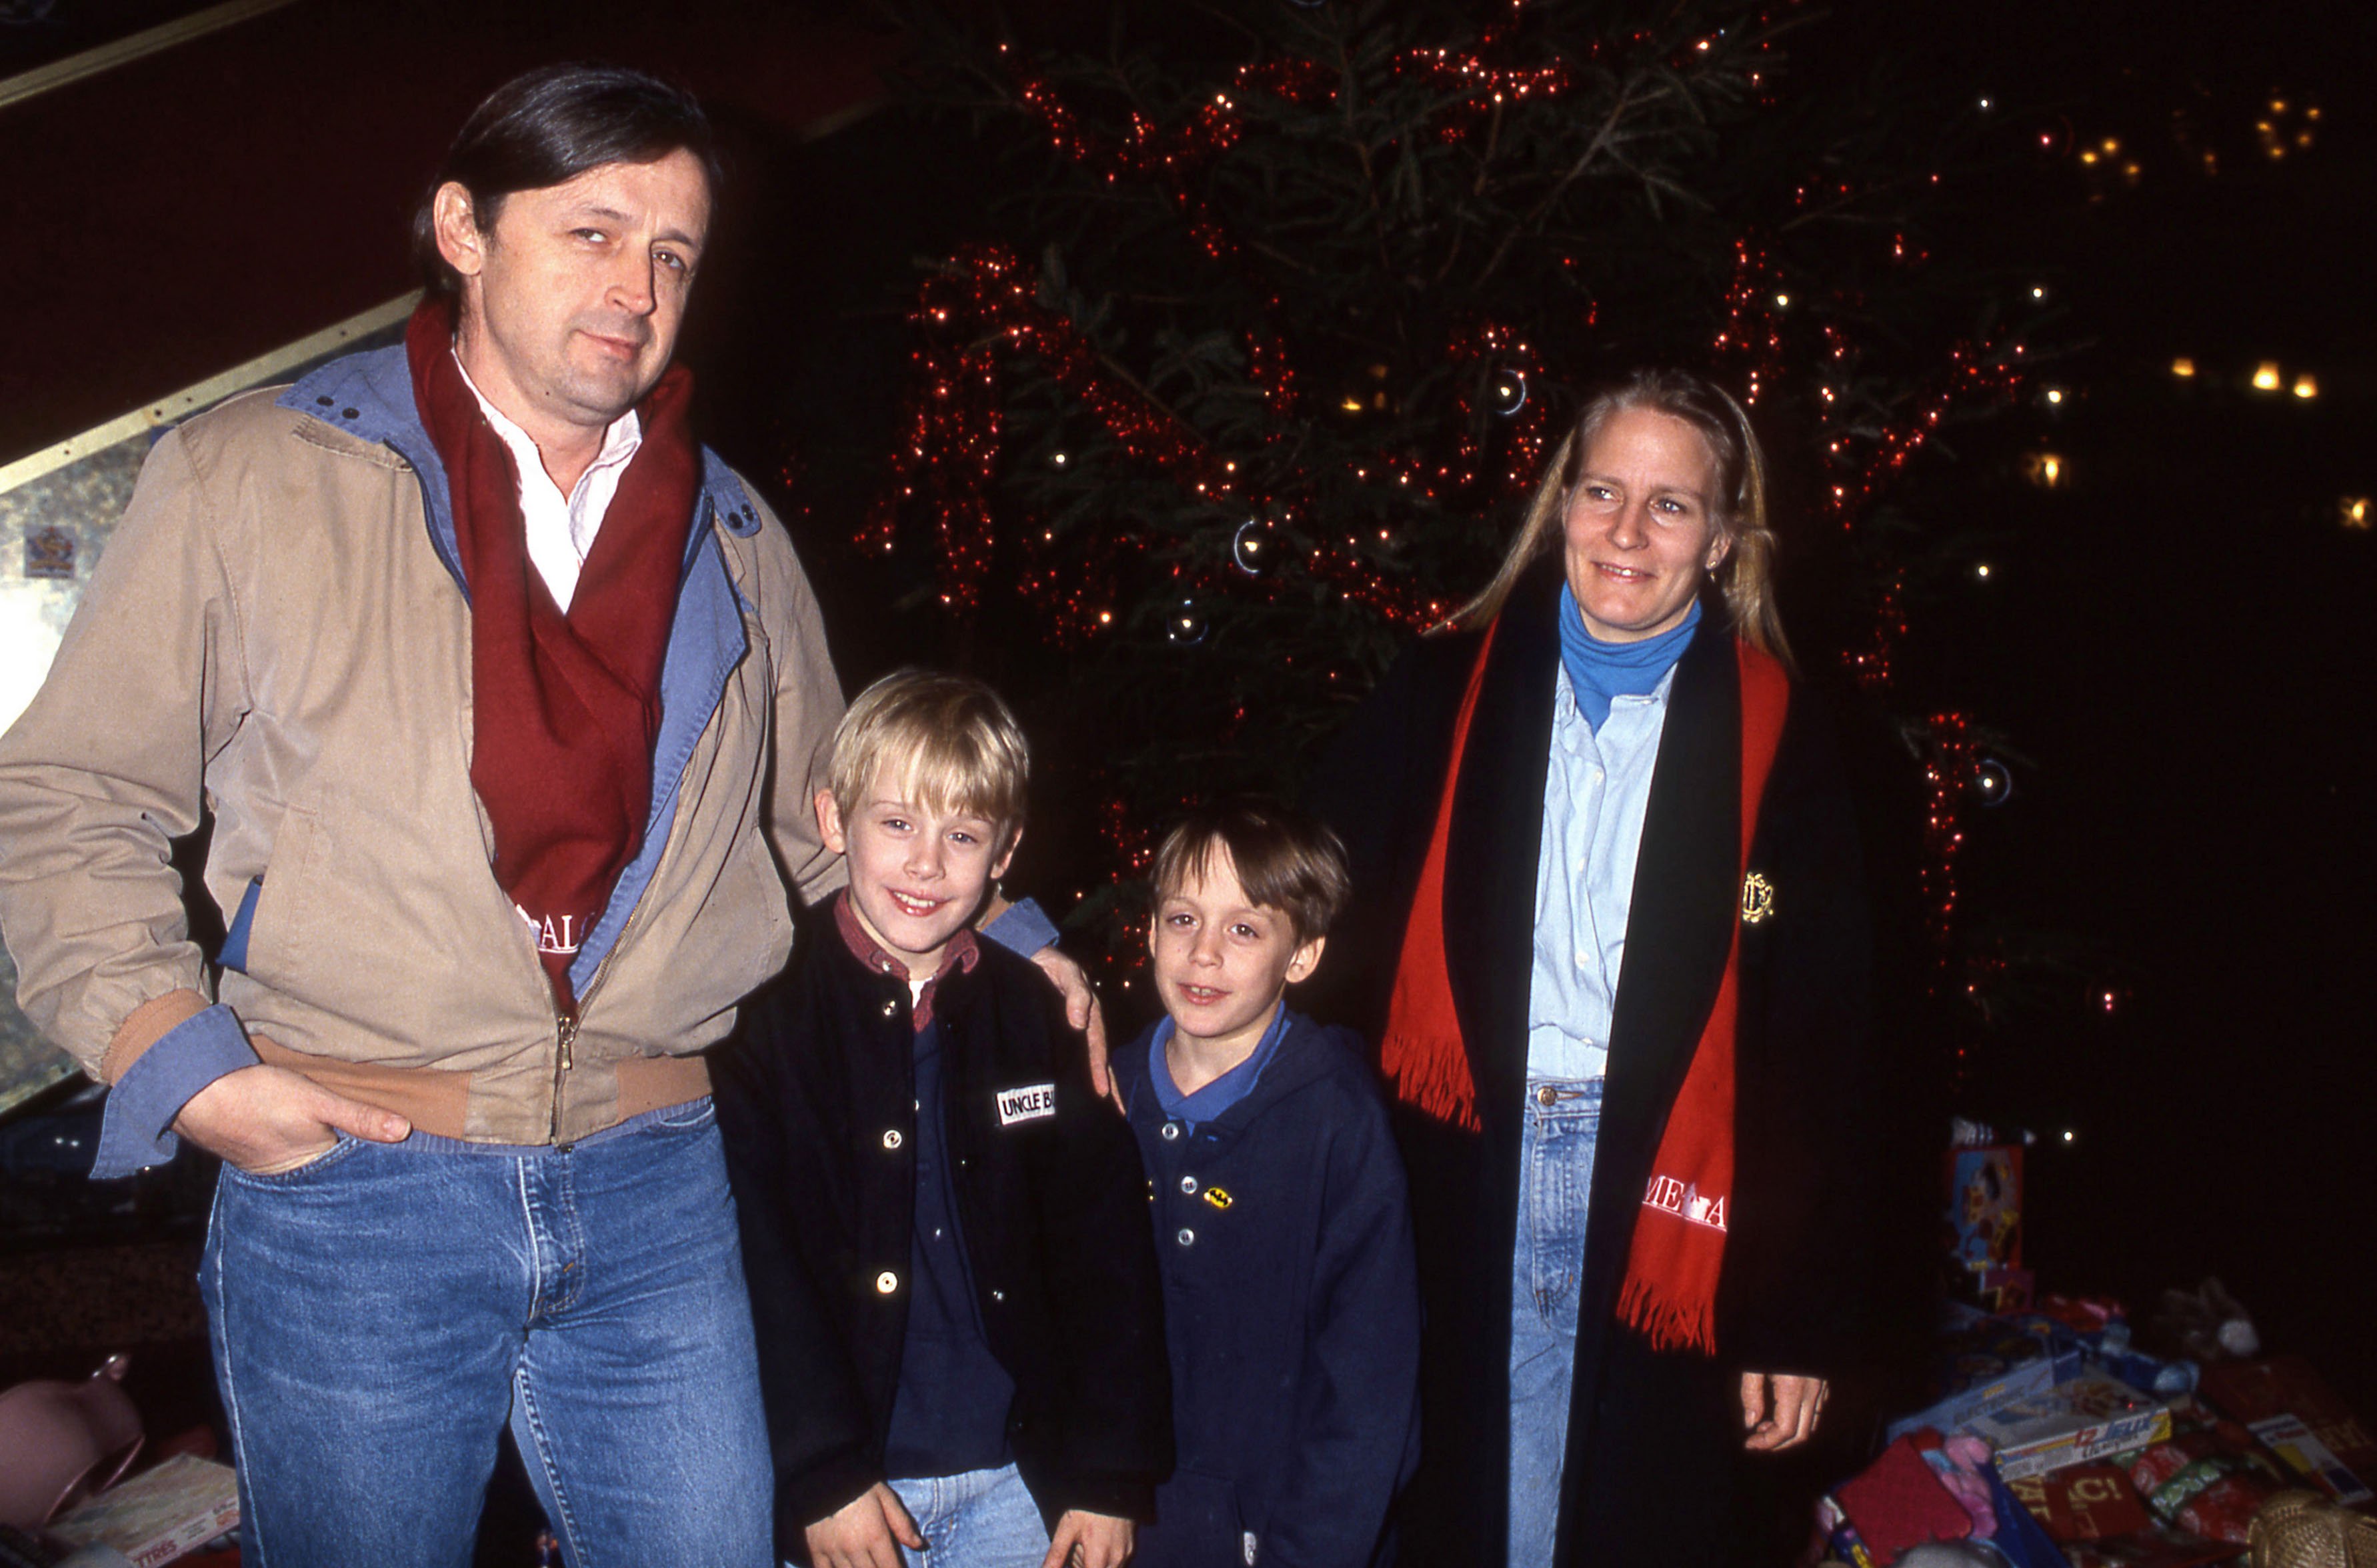 Macaulay Culkin with his mother, Patricia Brentrup, his father Christopher Kit Culkin, and brother Kieran on December 11, 1990 in Paris, France | Getty Images